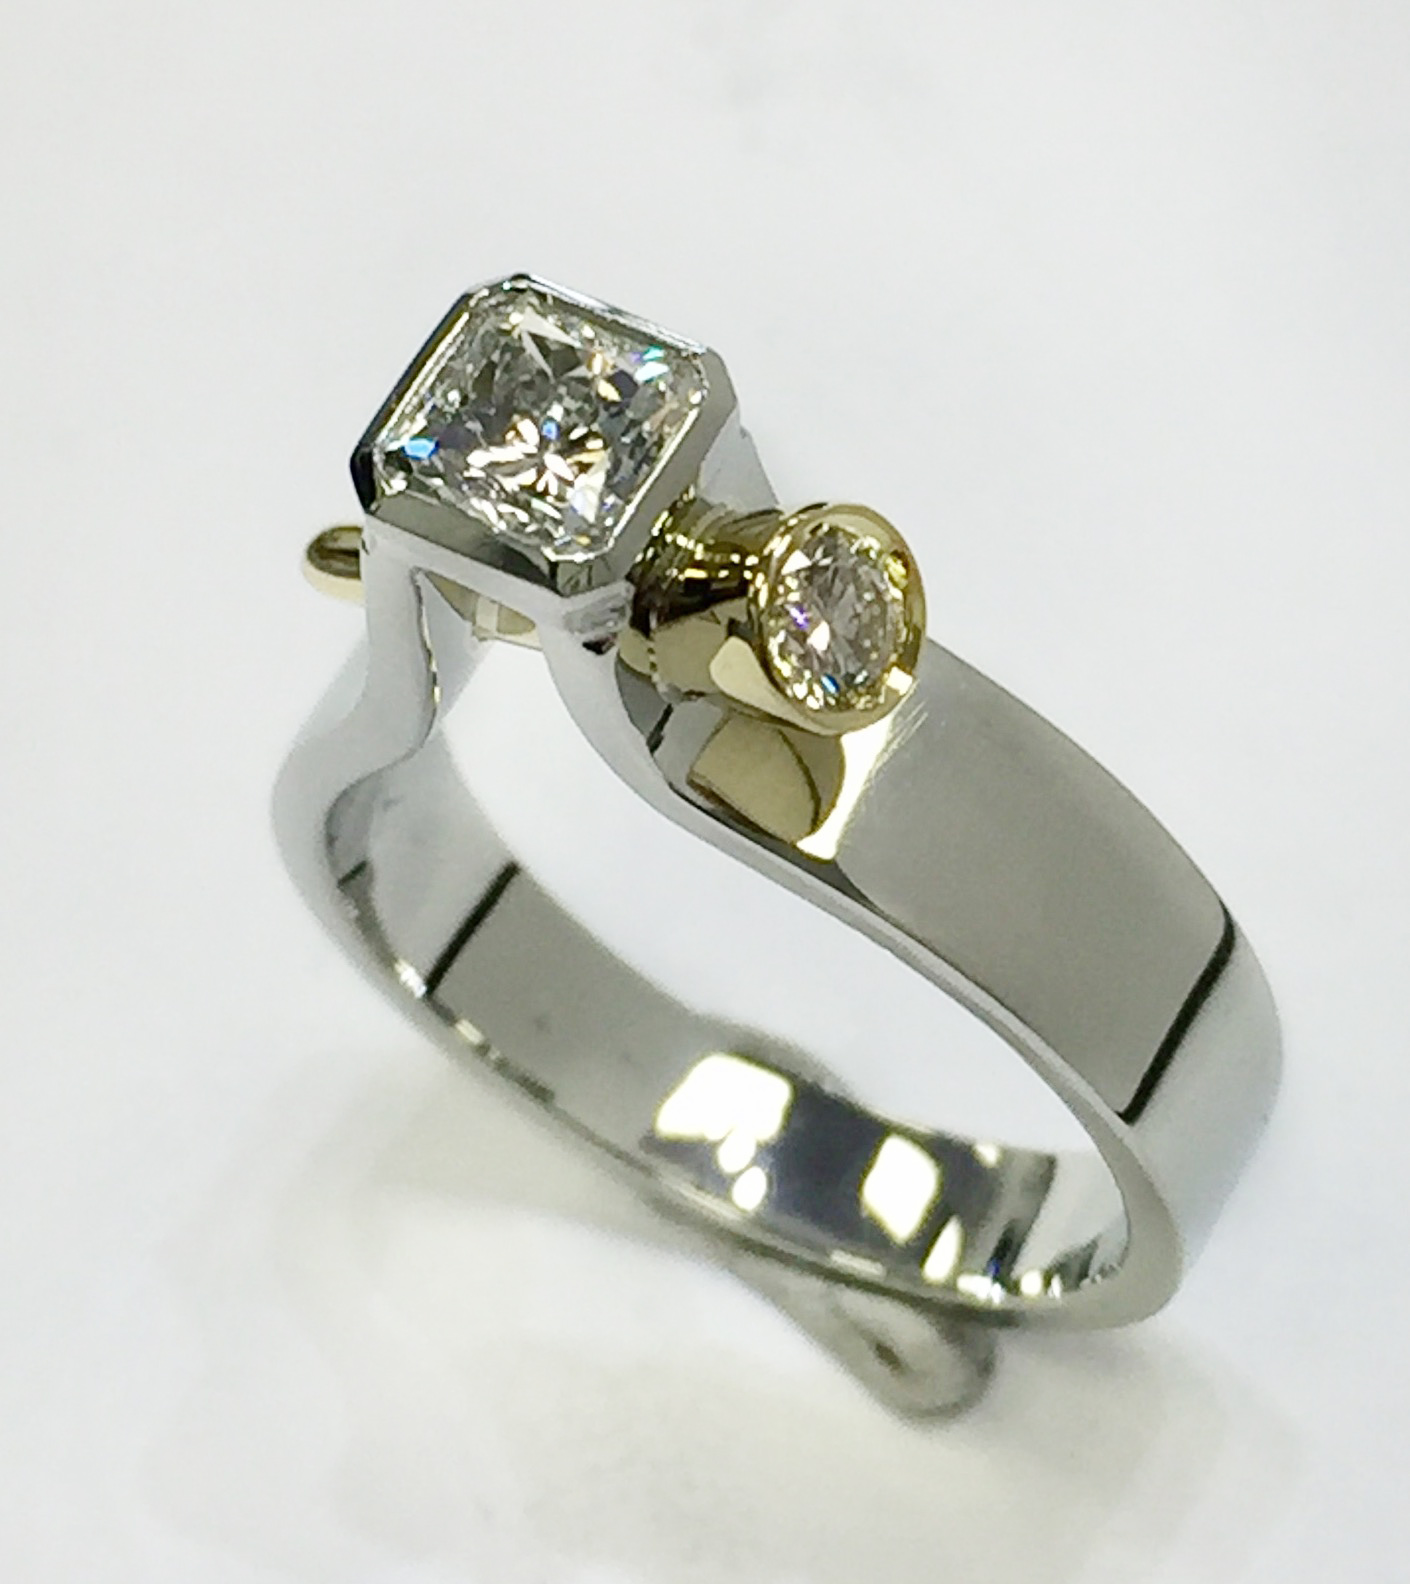 "Torch" ring